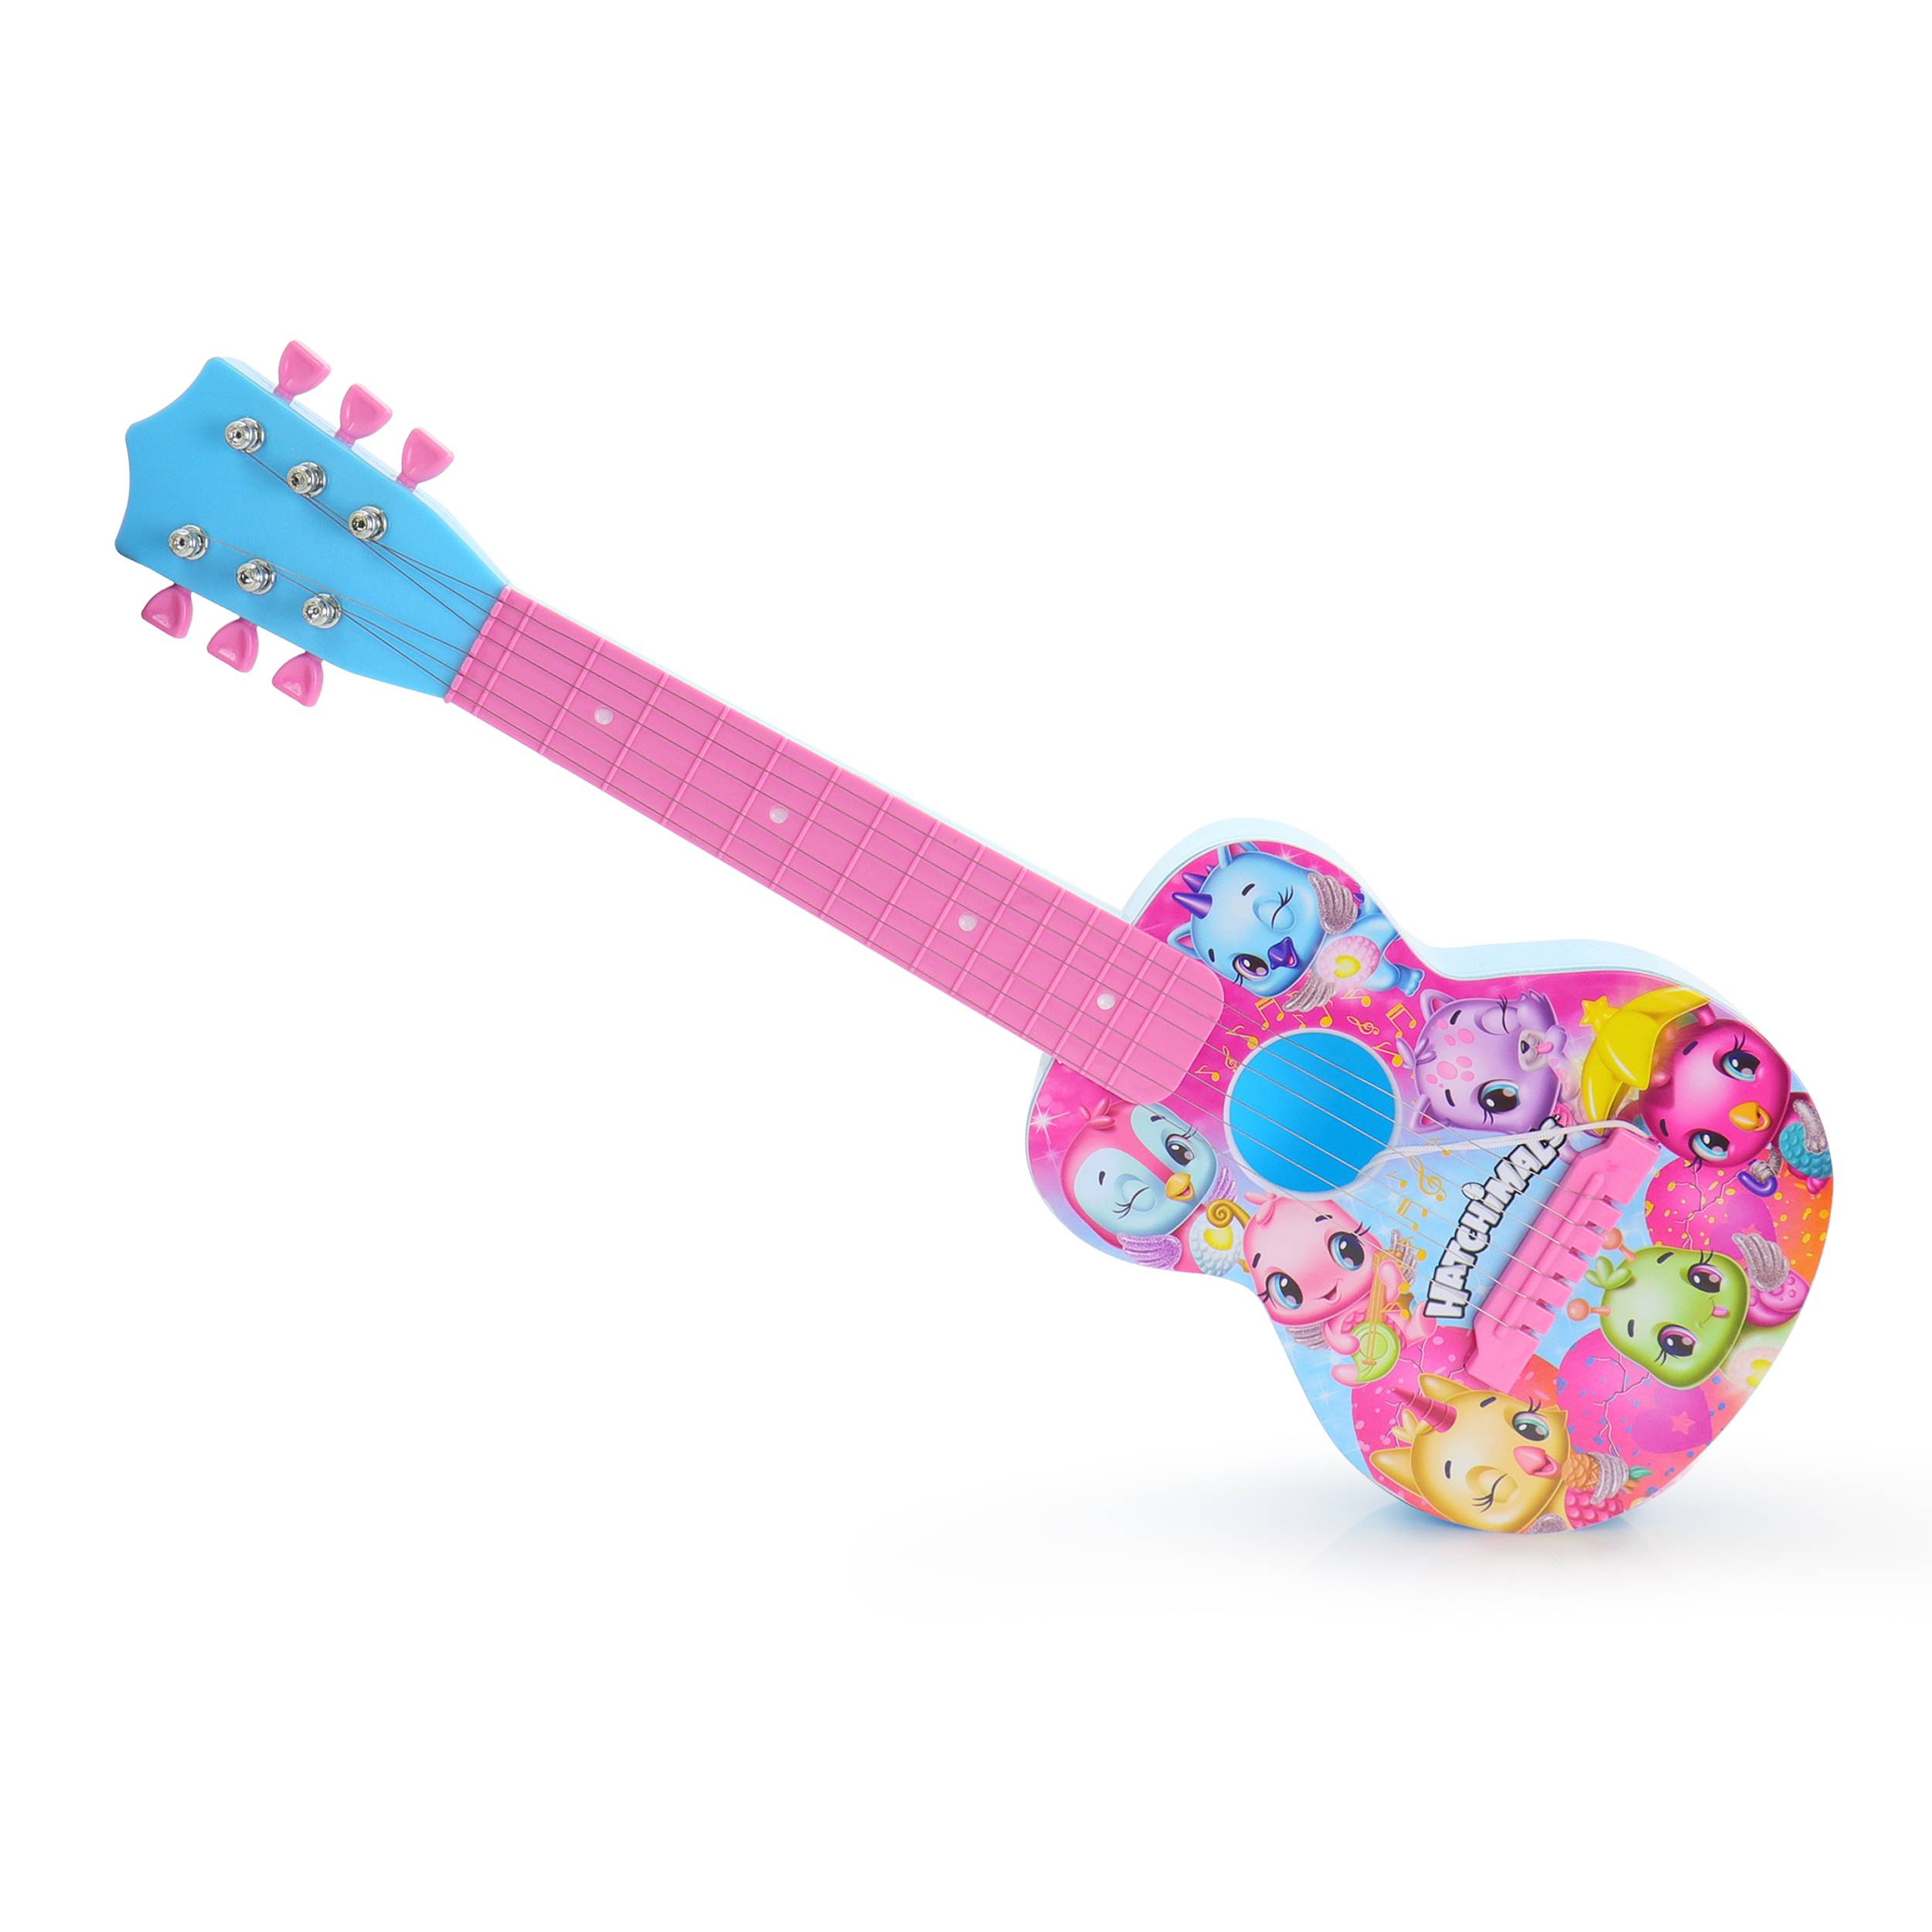 Sakar Pink Mini Guitar for Kids - 21 Inches, Creative Play Toy for 